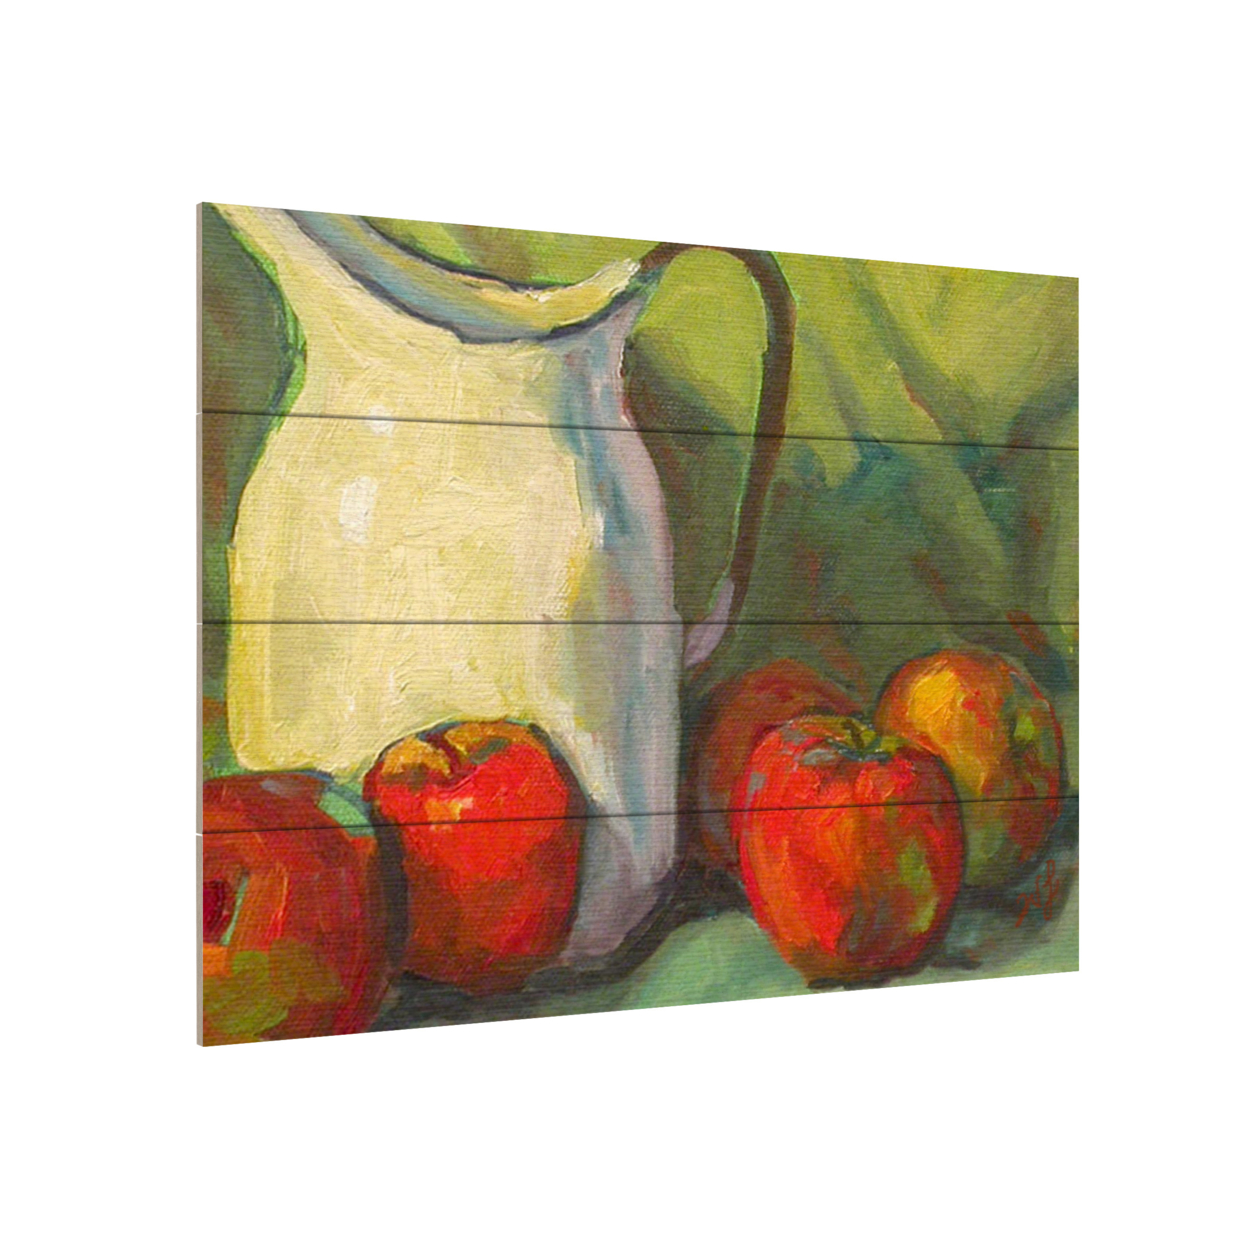 Wall Art 12 X 16 Inches Titled Milk Pitcher Ready To Hang Printed On Wooden Planks